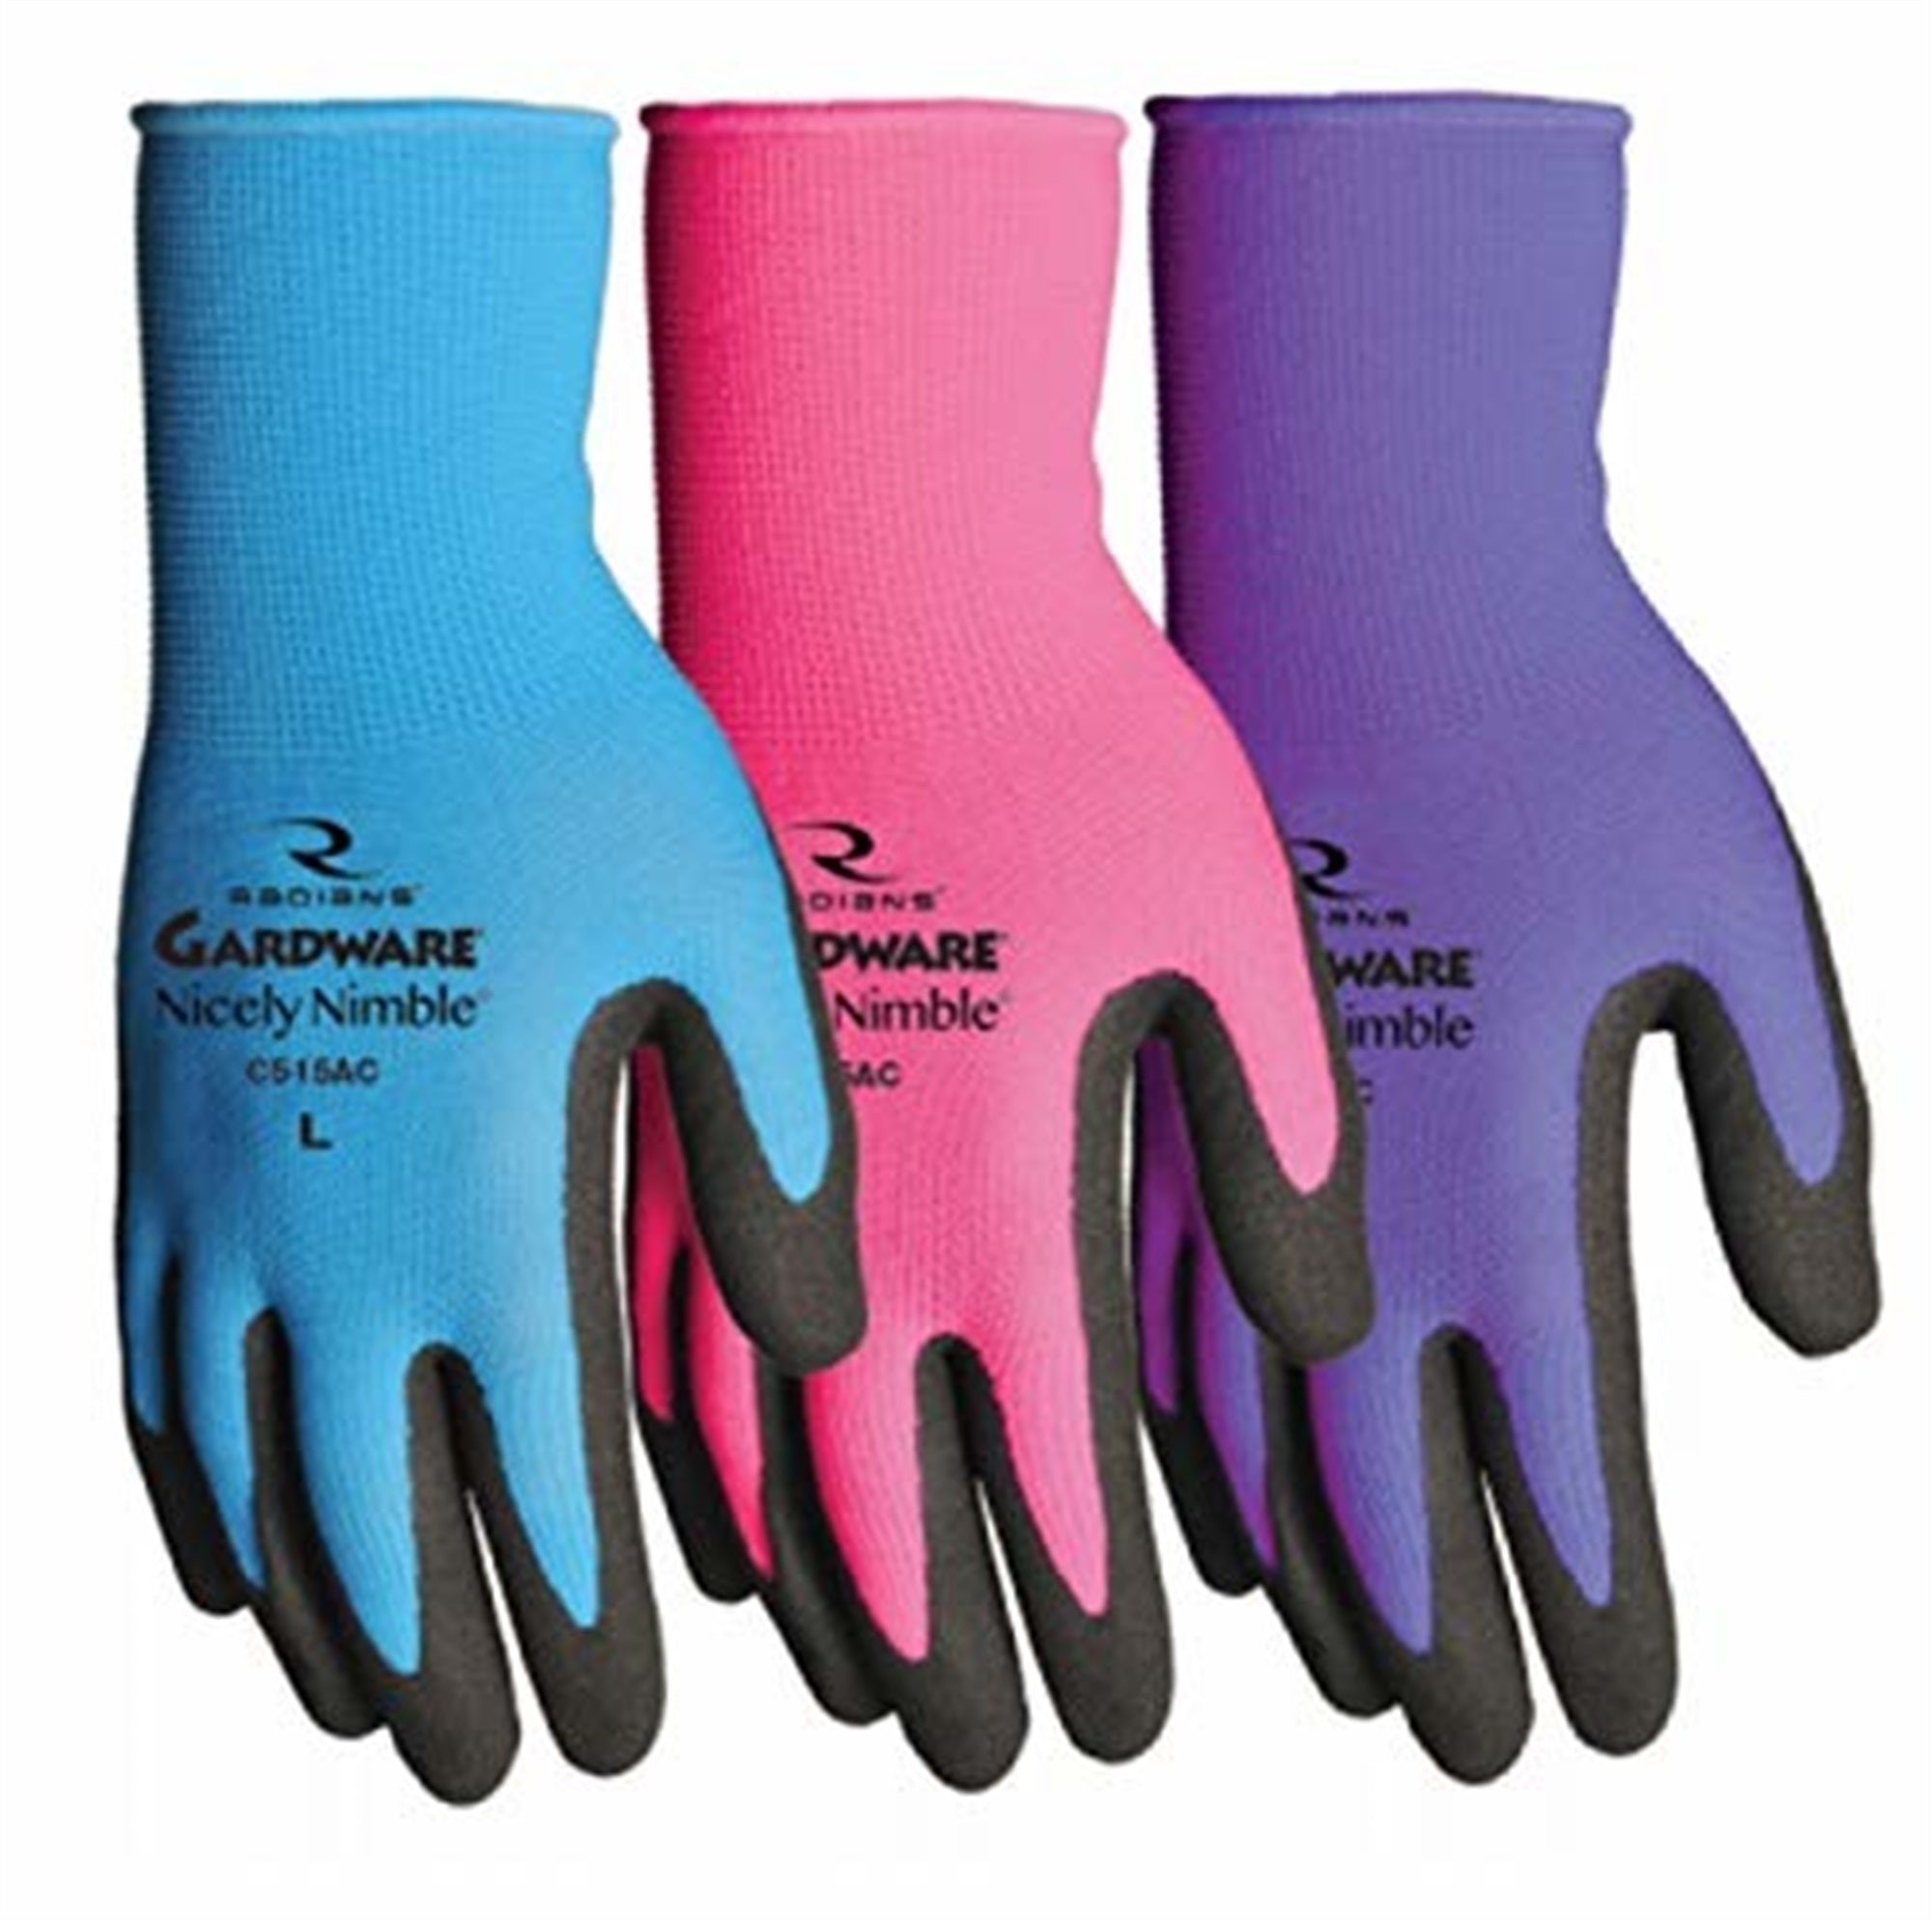 Bellingham Gard Ware Nicely Nimble Gloves, Large. Assorted Colors, (1 Pair)